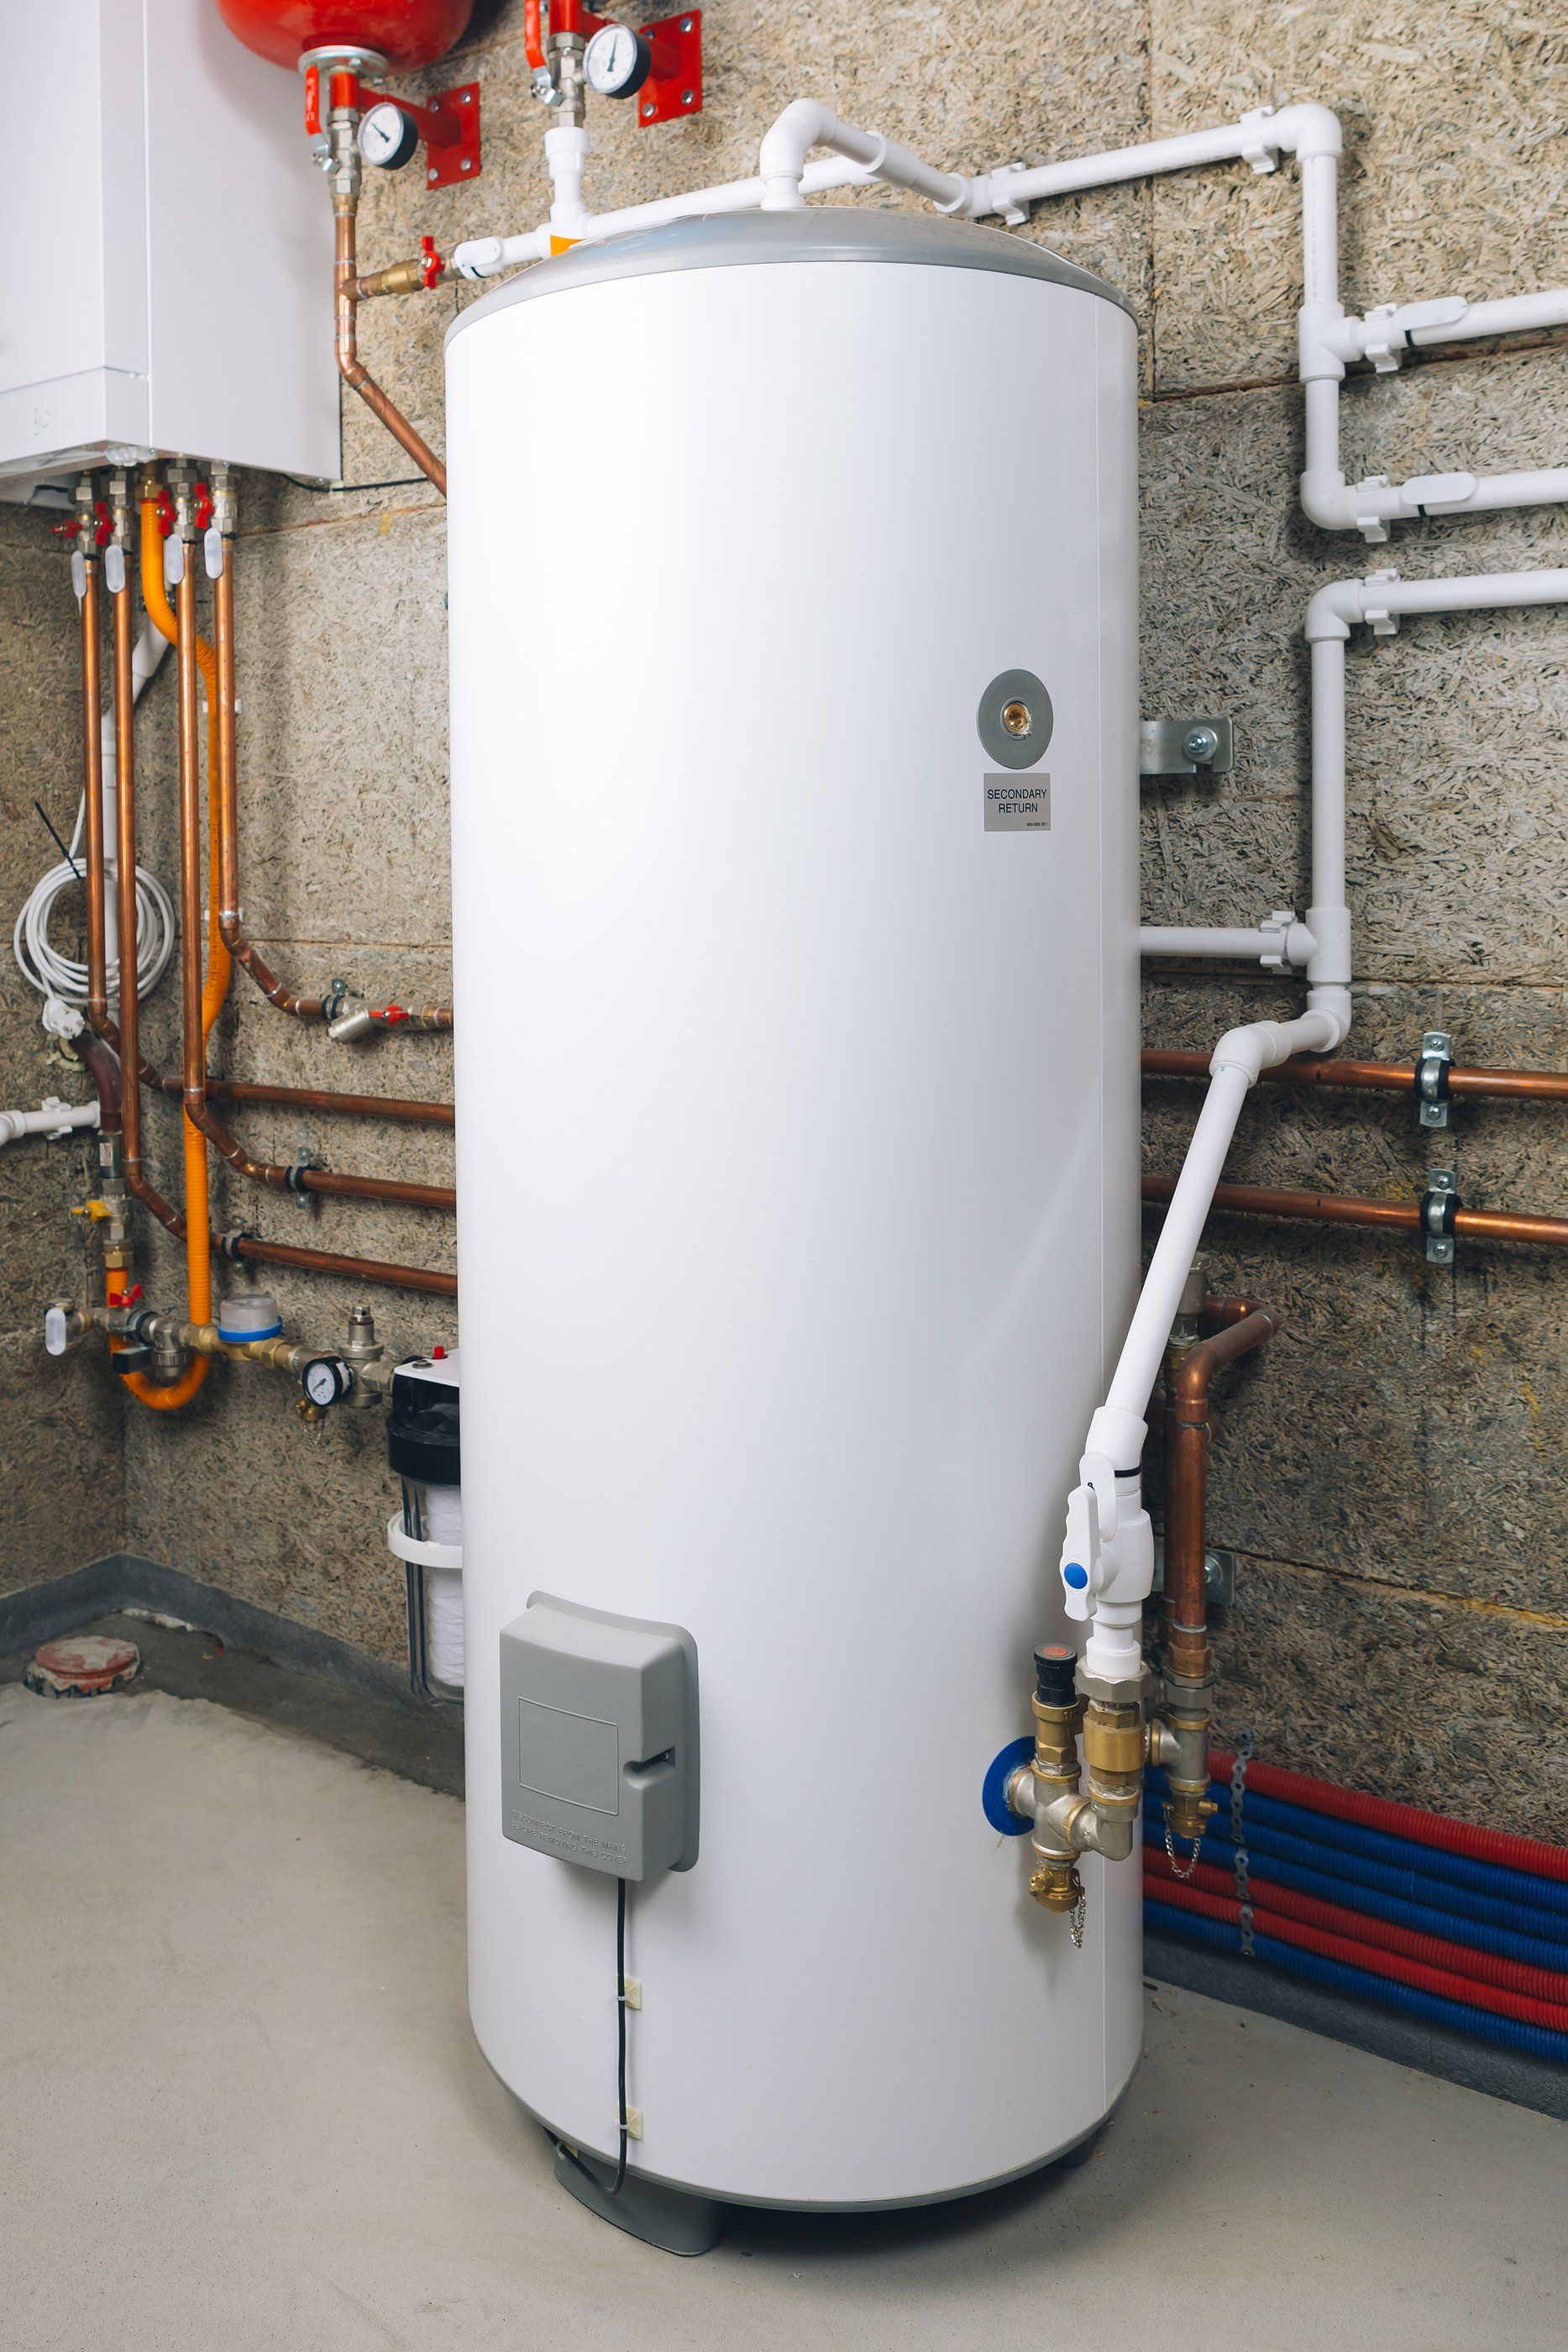 Water Heater Installation and Repair Services in Phoenix, AZ